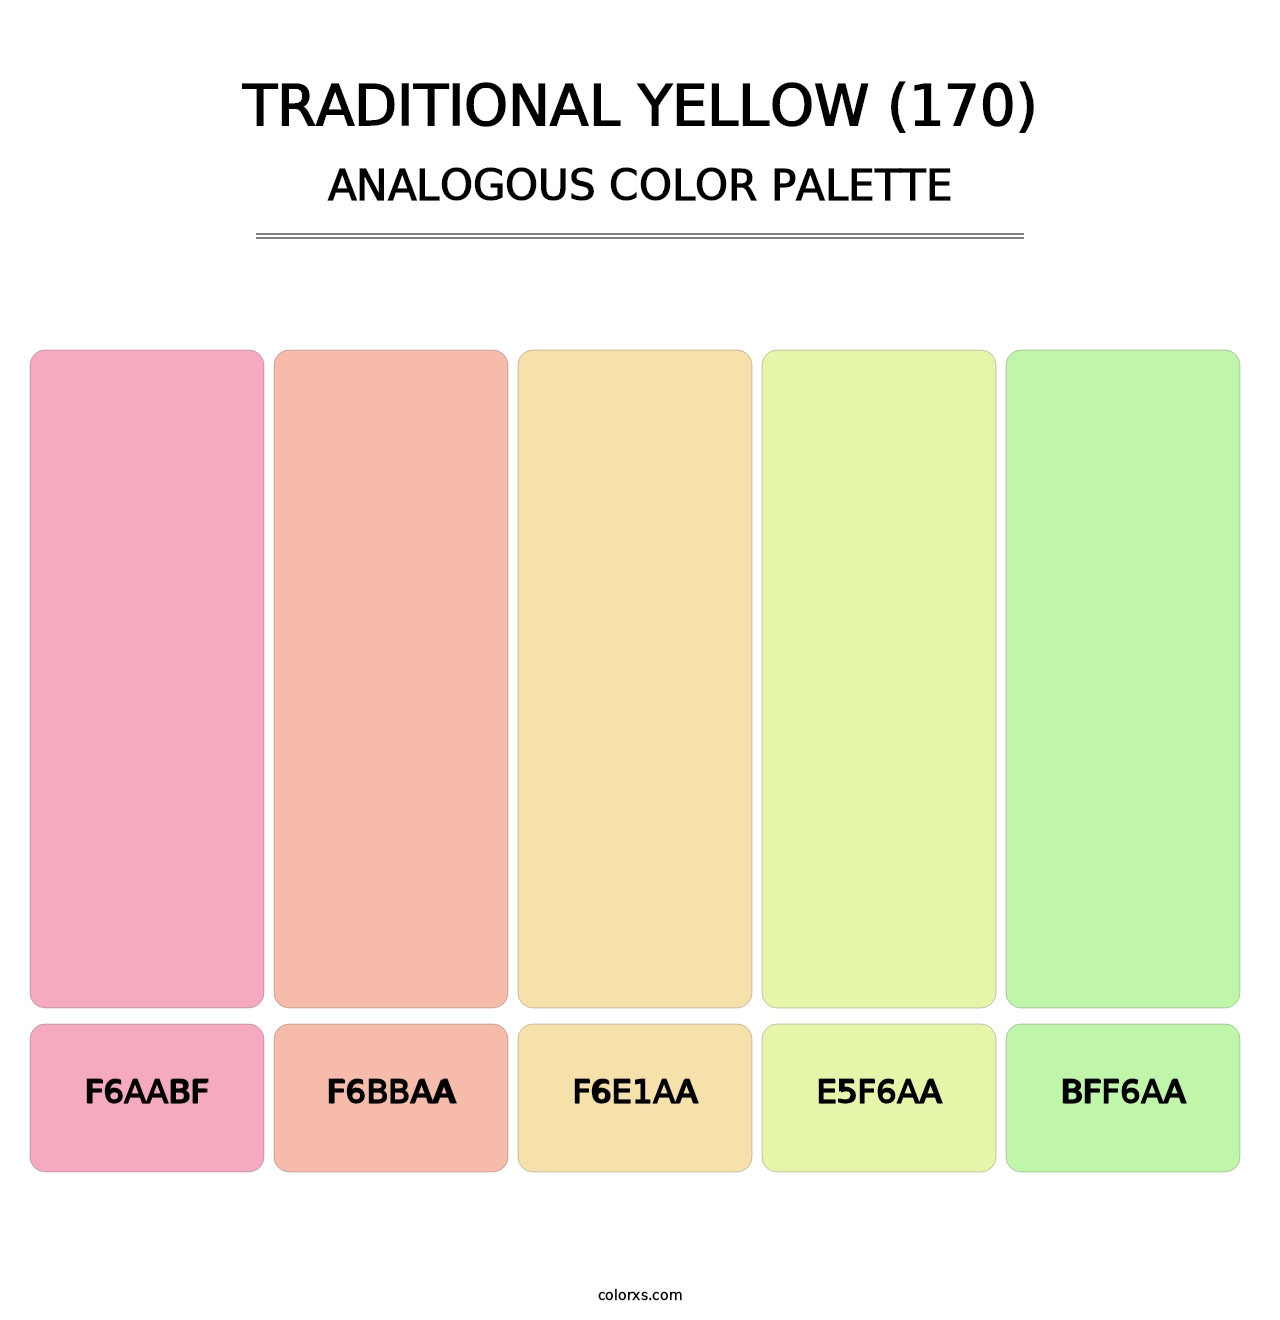 Traditional Yellow (170) - Analogous Color Palette